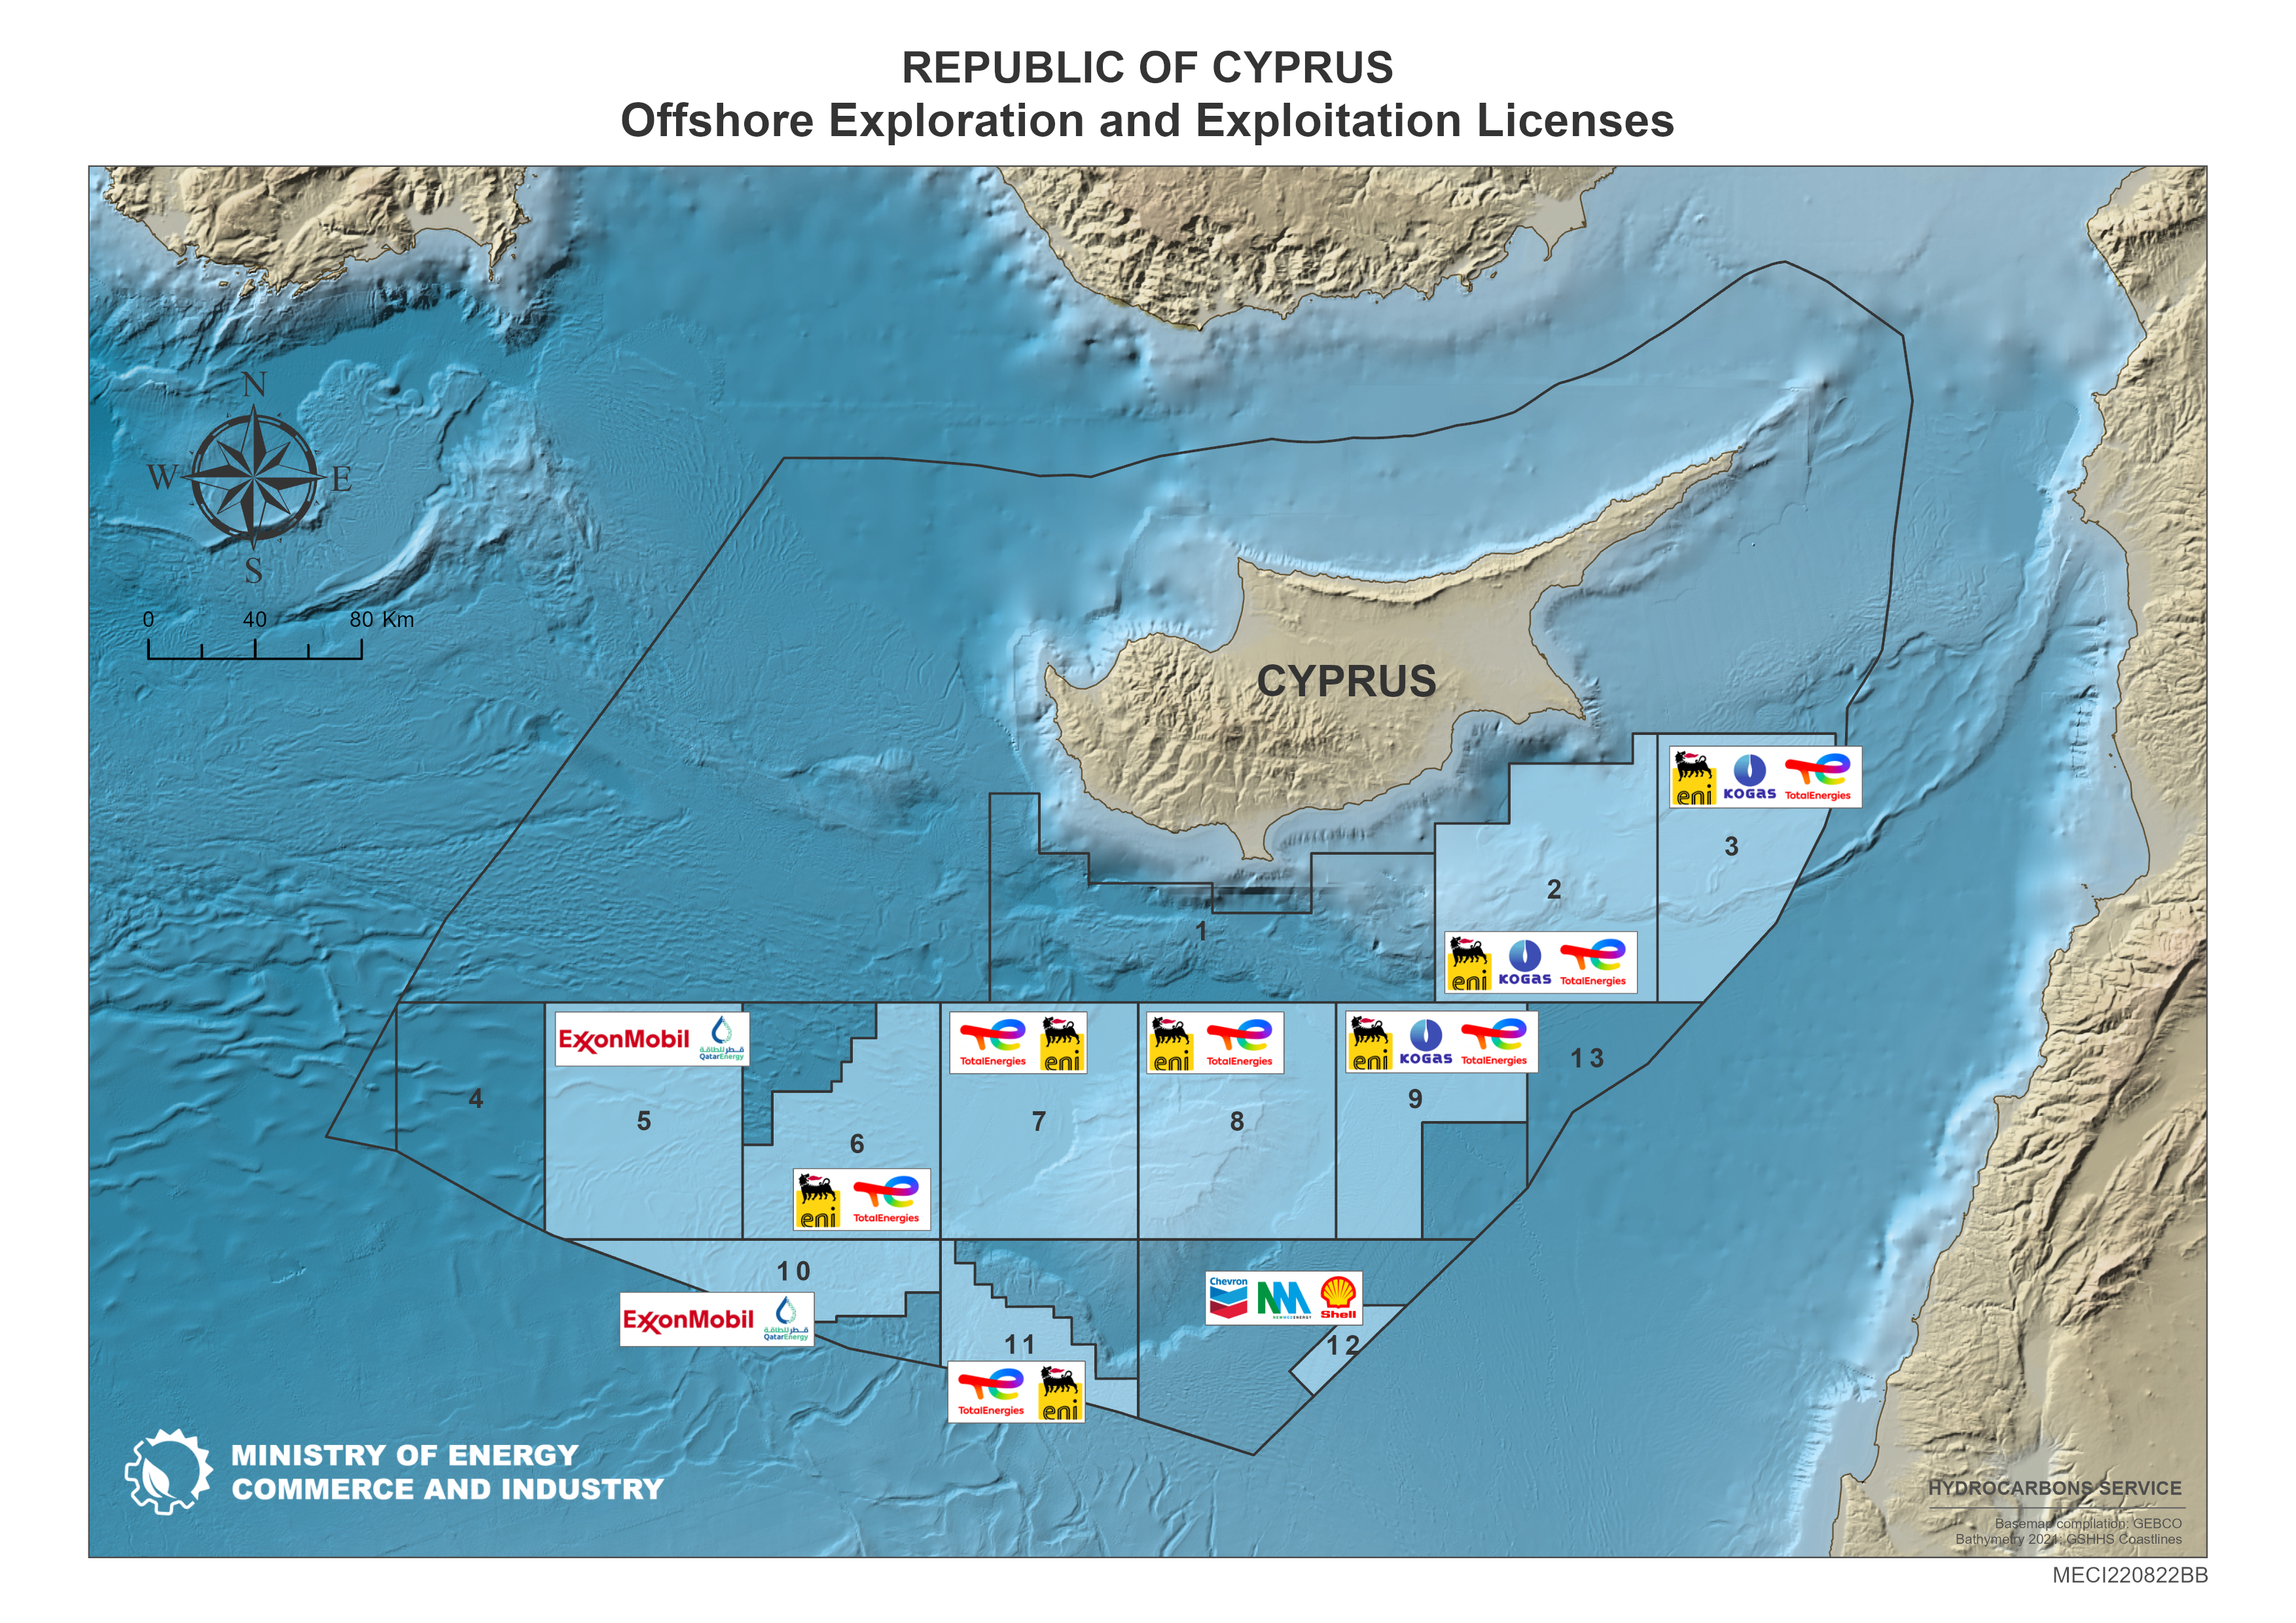 Offshore Exploration and Exploitation Licenses of the Republic of Cyprus